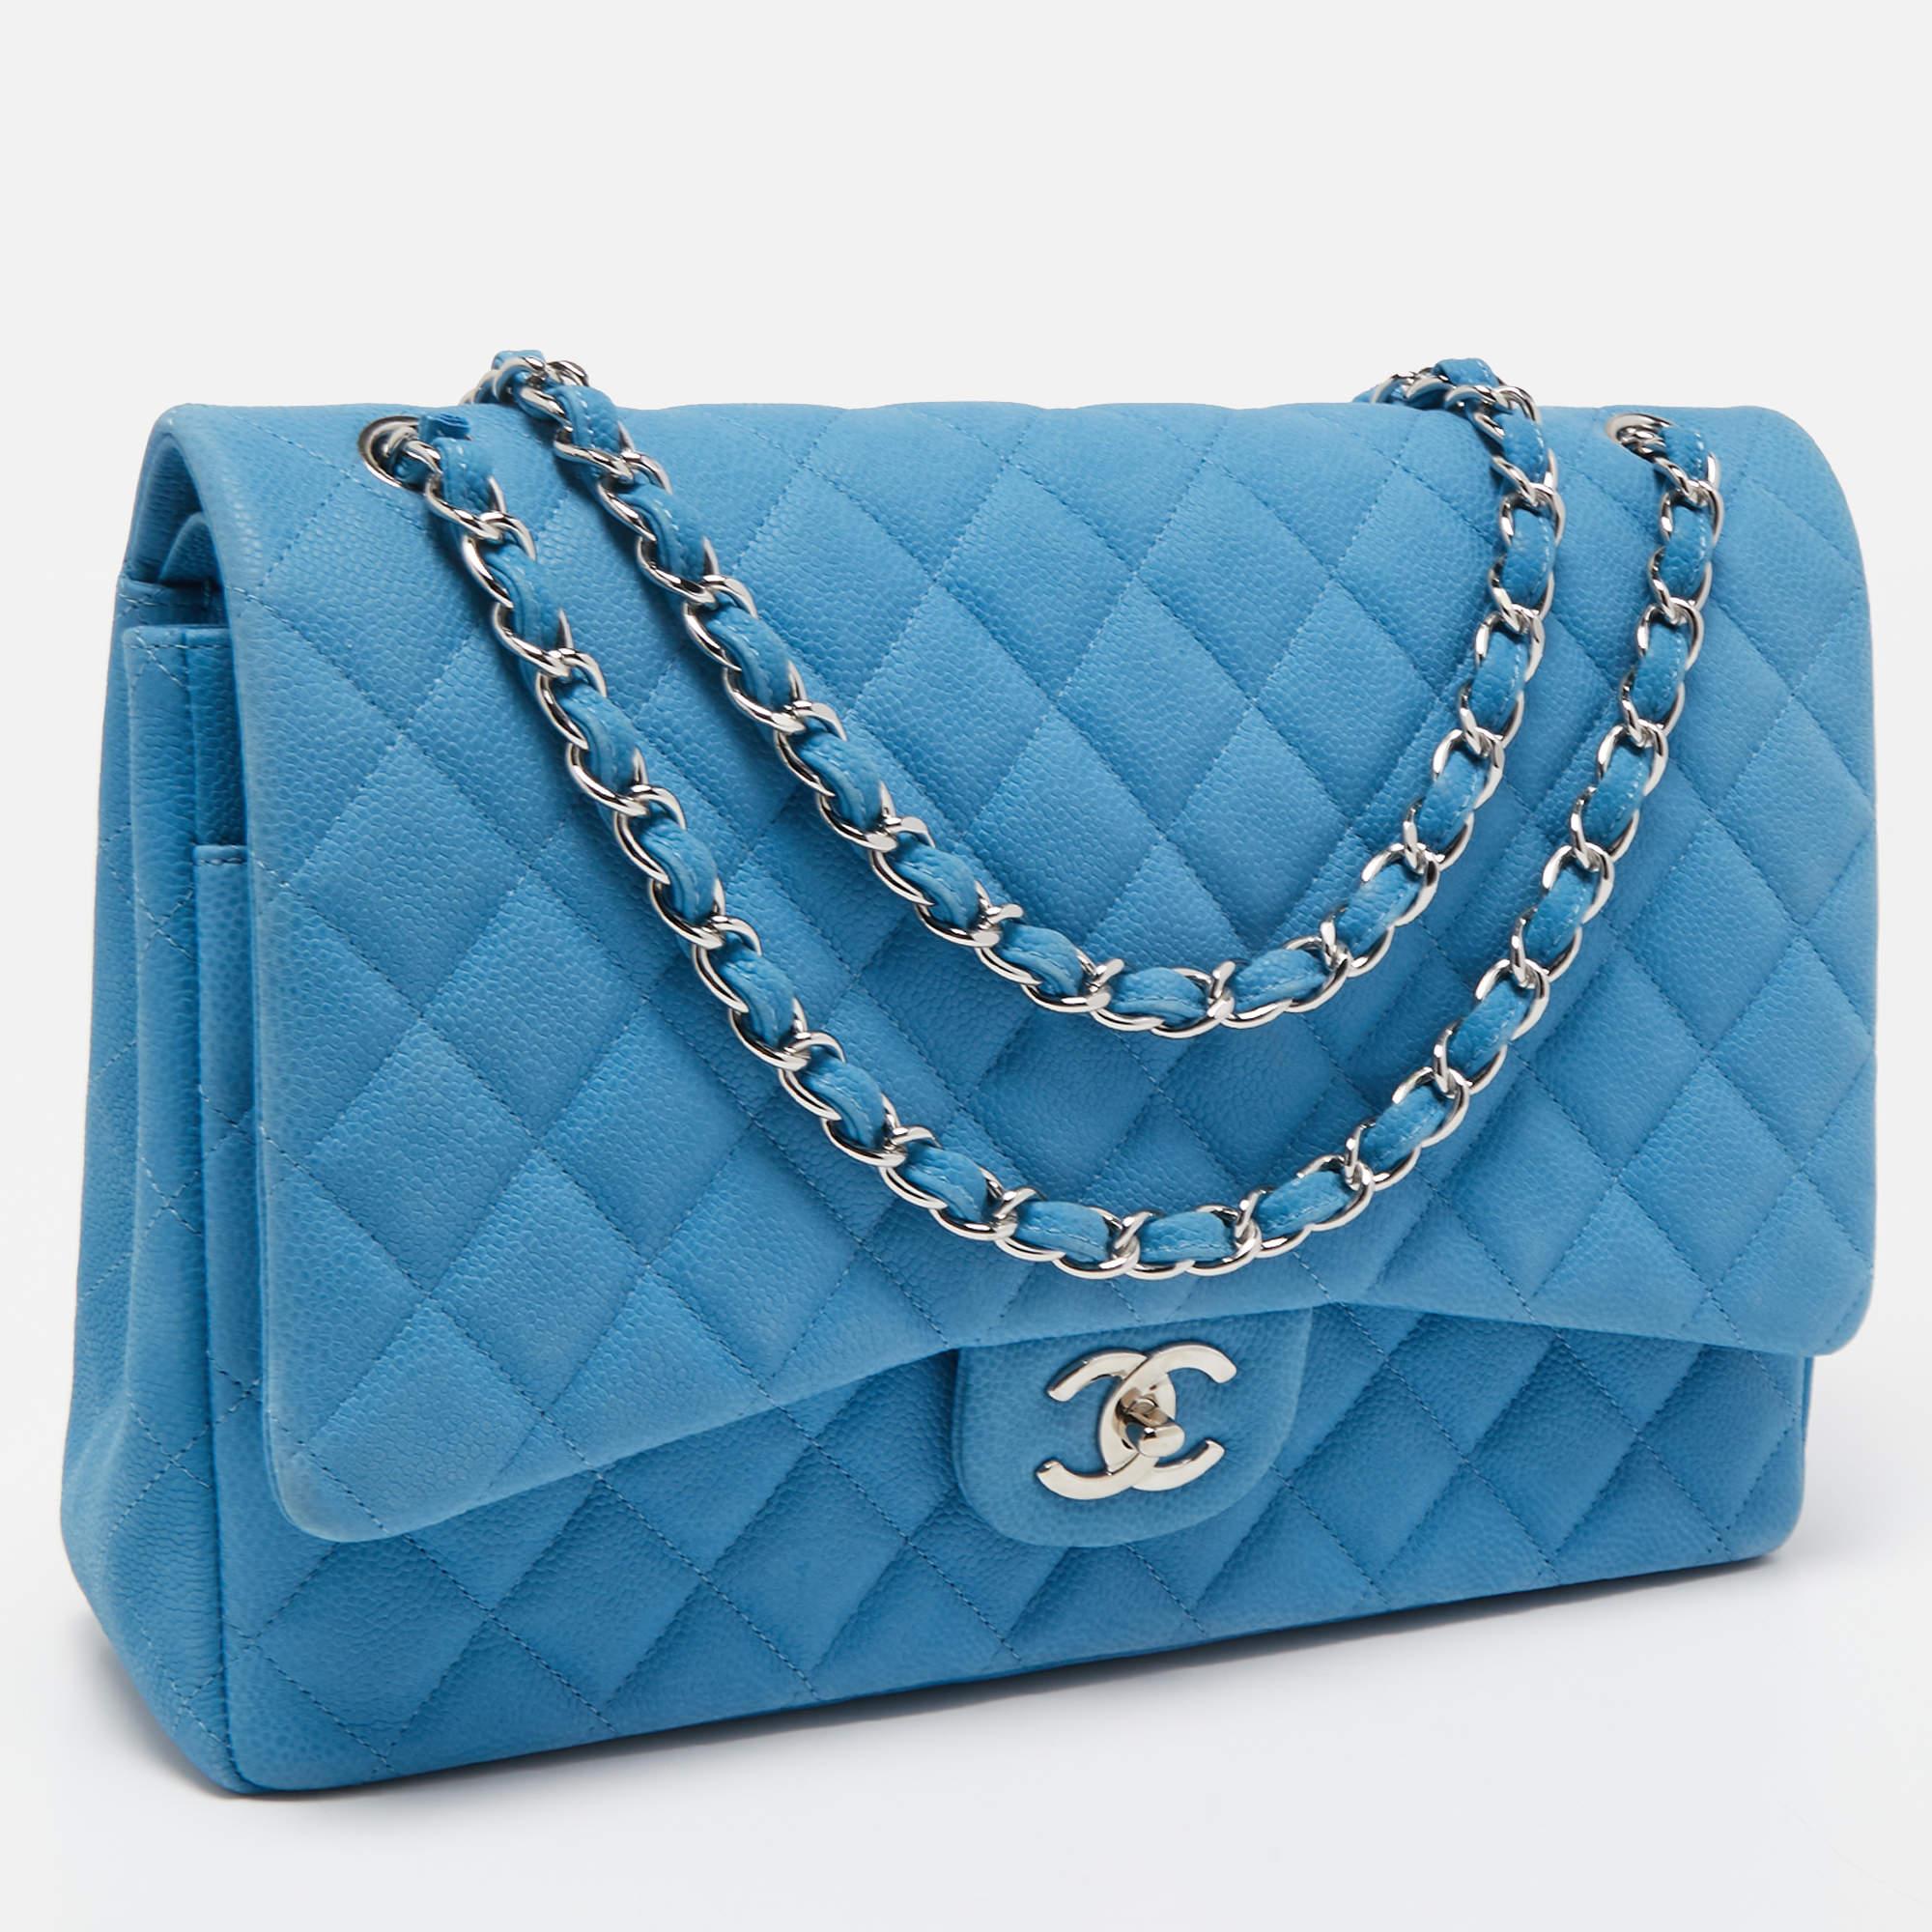 Chanel Blue Quilted Caviar Leather Maxi Classic Double Flap Bag In Good Condition For Sale In Dubai, Al Qouz 2